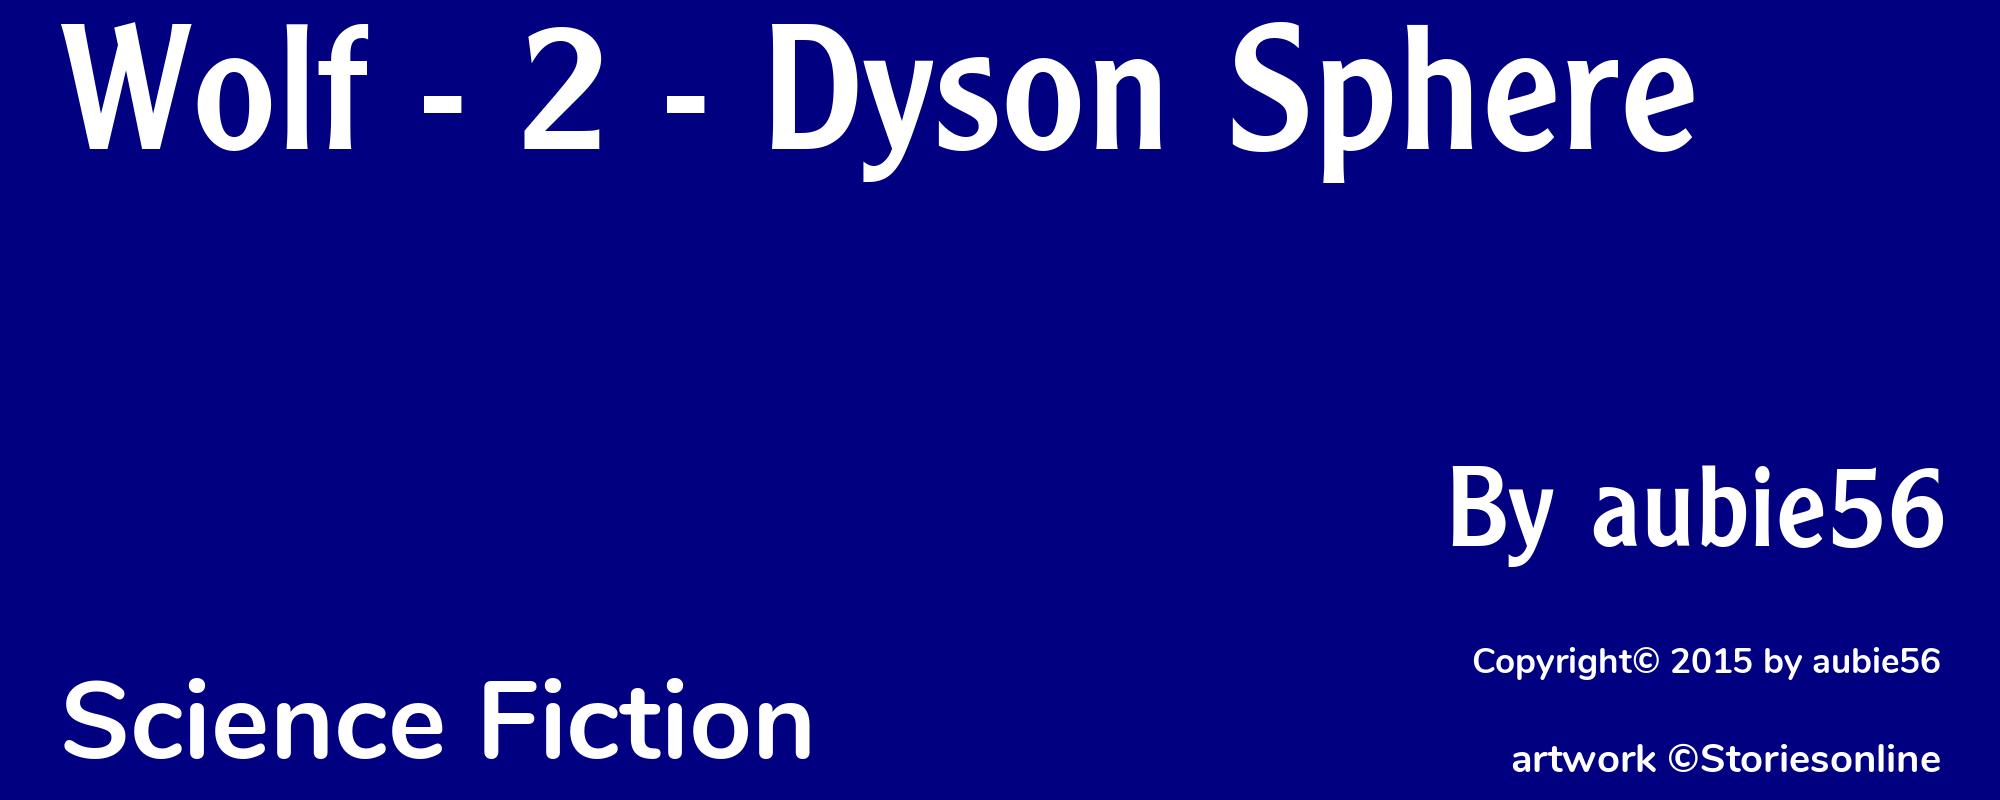 Wolf - 2 - Dyson Sphere - Cover